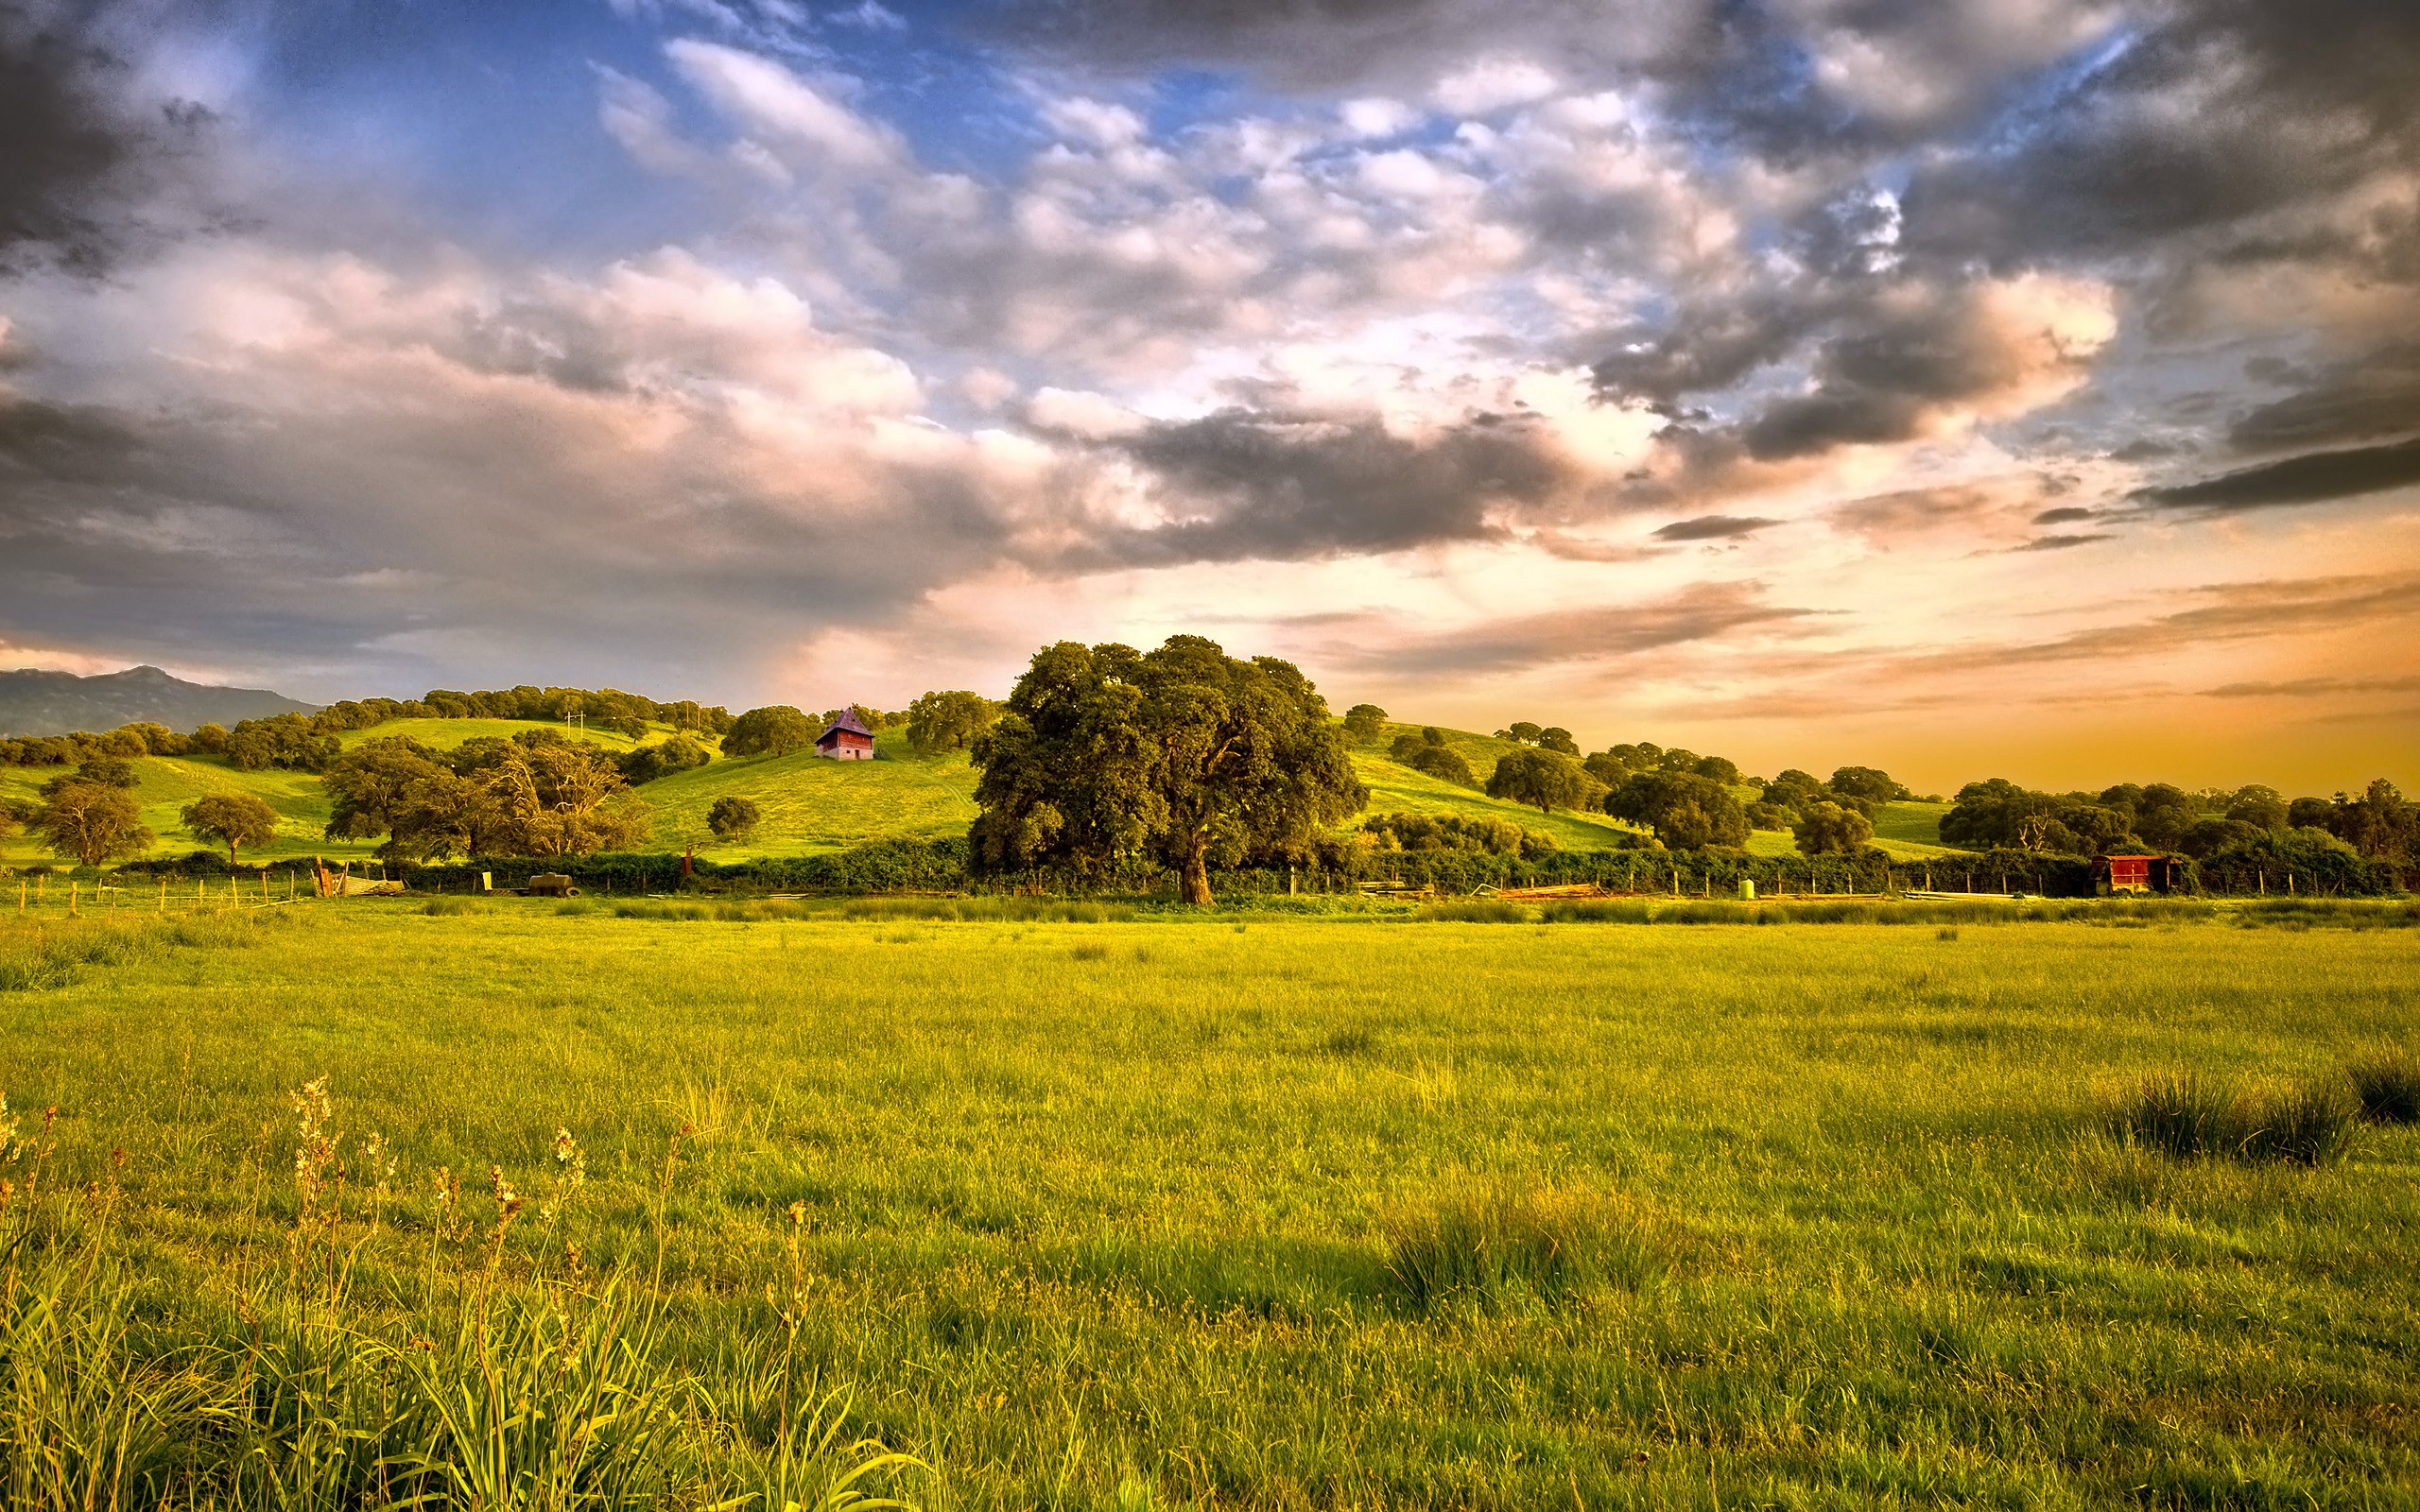 Clouds Landscapes Wallpaper 2560x1600 Clouds, Landscapes, Trees, HDR, Photography, Countryside